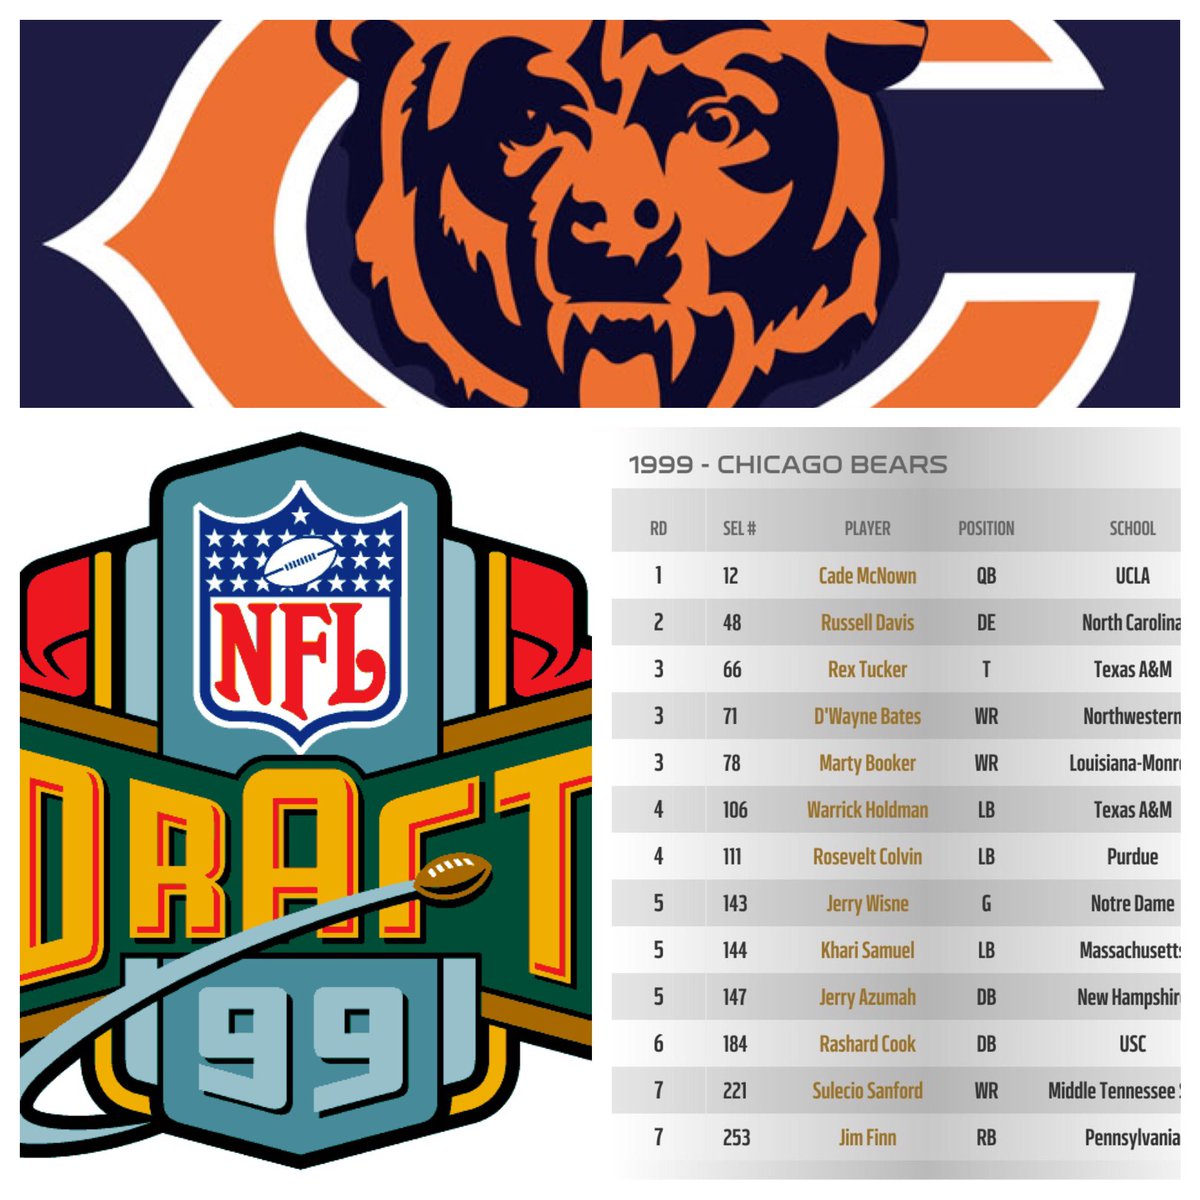 “With the 111th pick in the 1999 NFL Draft, the @ChicagoBears select, Rosevelt Colvin, DE, Purdue”. IMO the 99 draft class was the best in Bears history. 😎S/O to my guys! #dabears